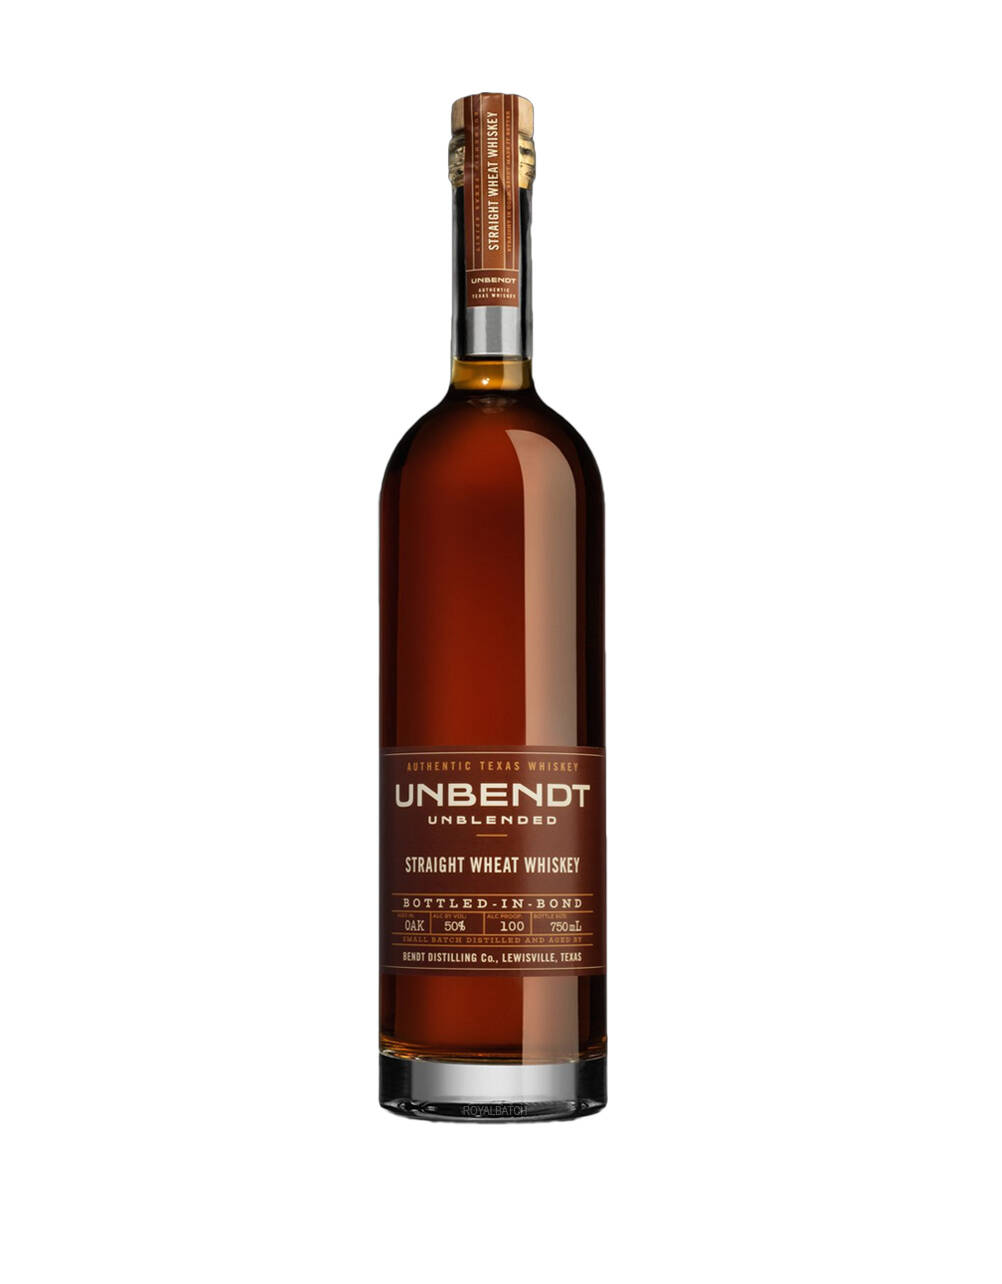 Unbendt Unblended Straight Wheat Whiskey